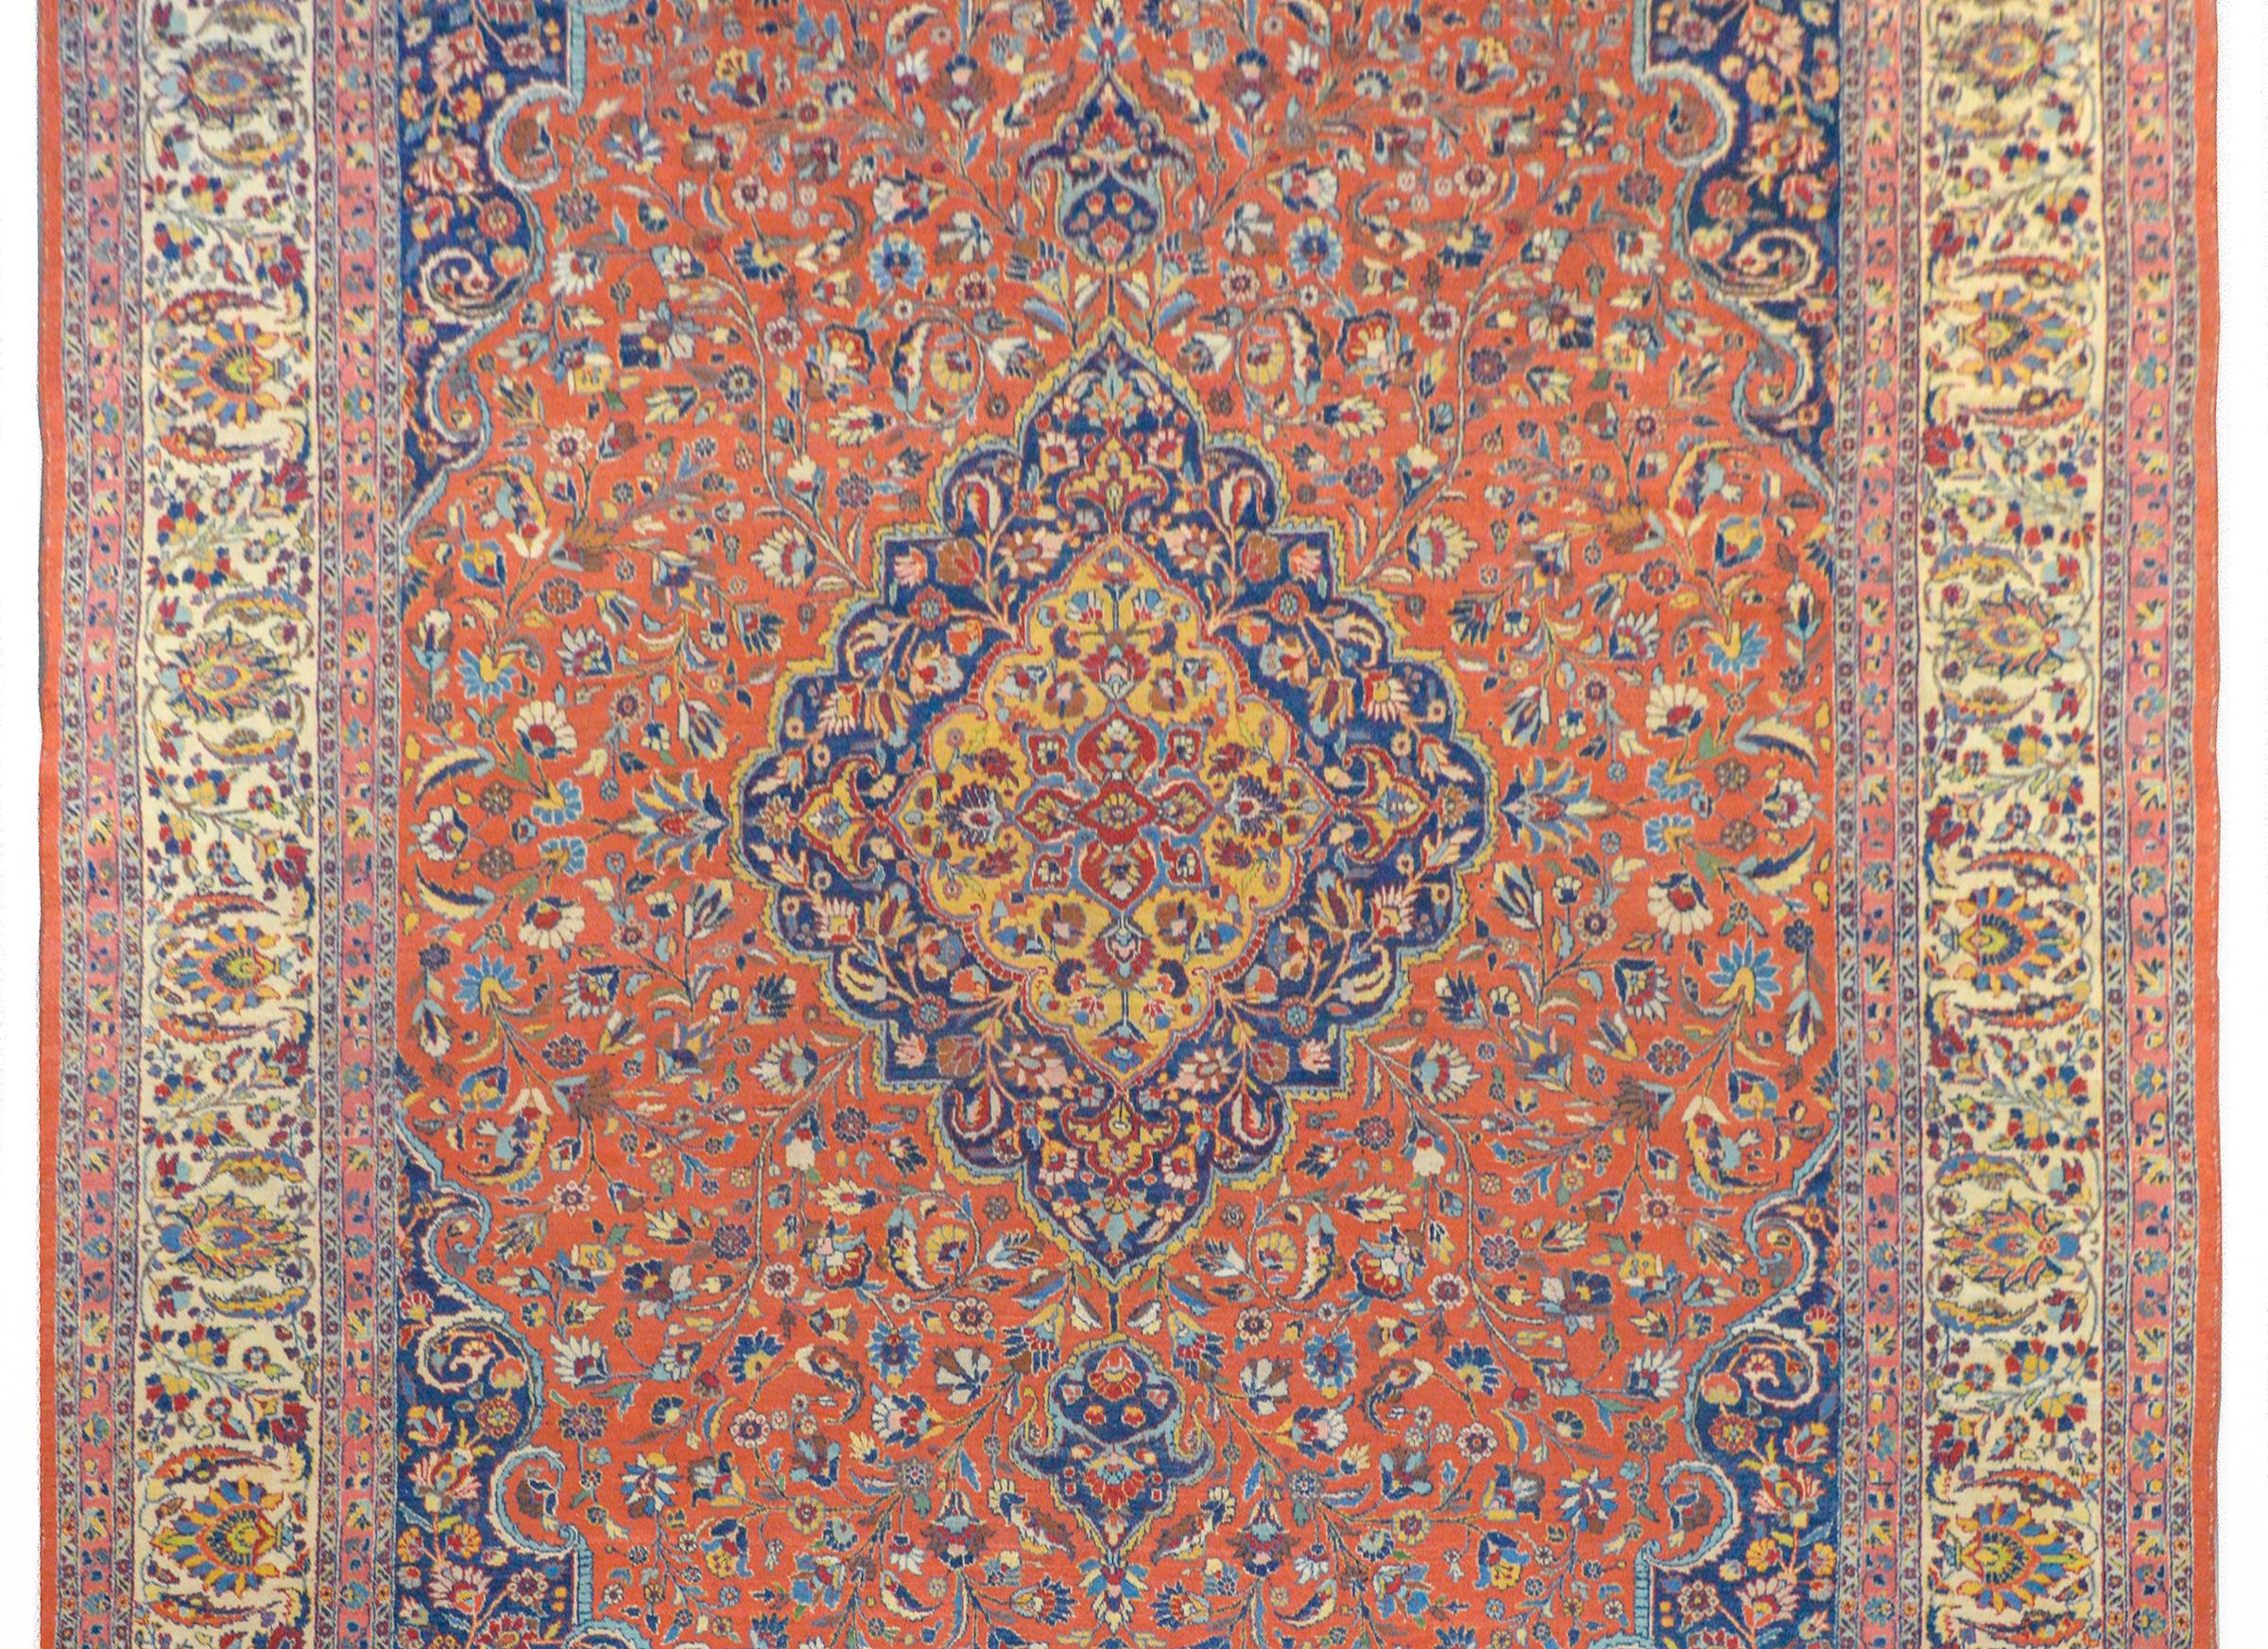 An extraordinary early 20th century Persian Tabriz rug with an elaborate pattern containing multiple central medallions stacked on top of one another, and each with a distinct floral and scrolling vine pattern, all woven in gold, crimson, brown,